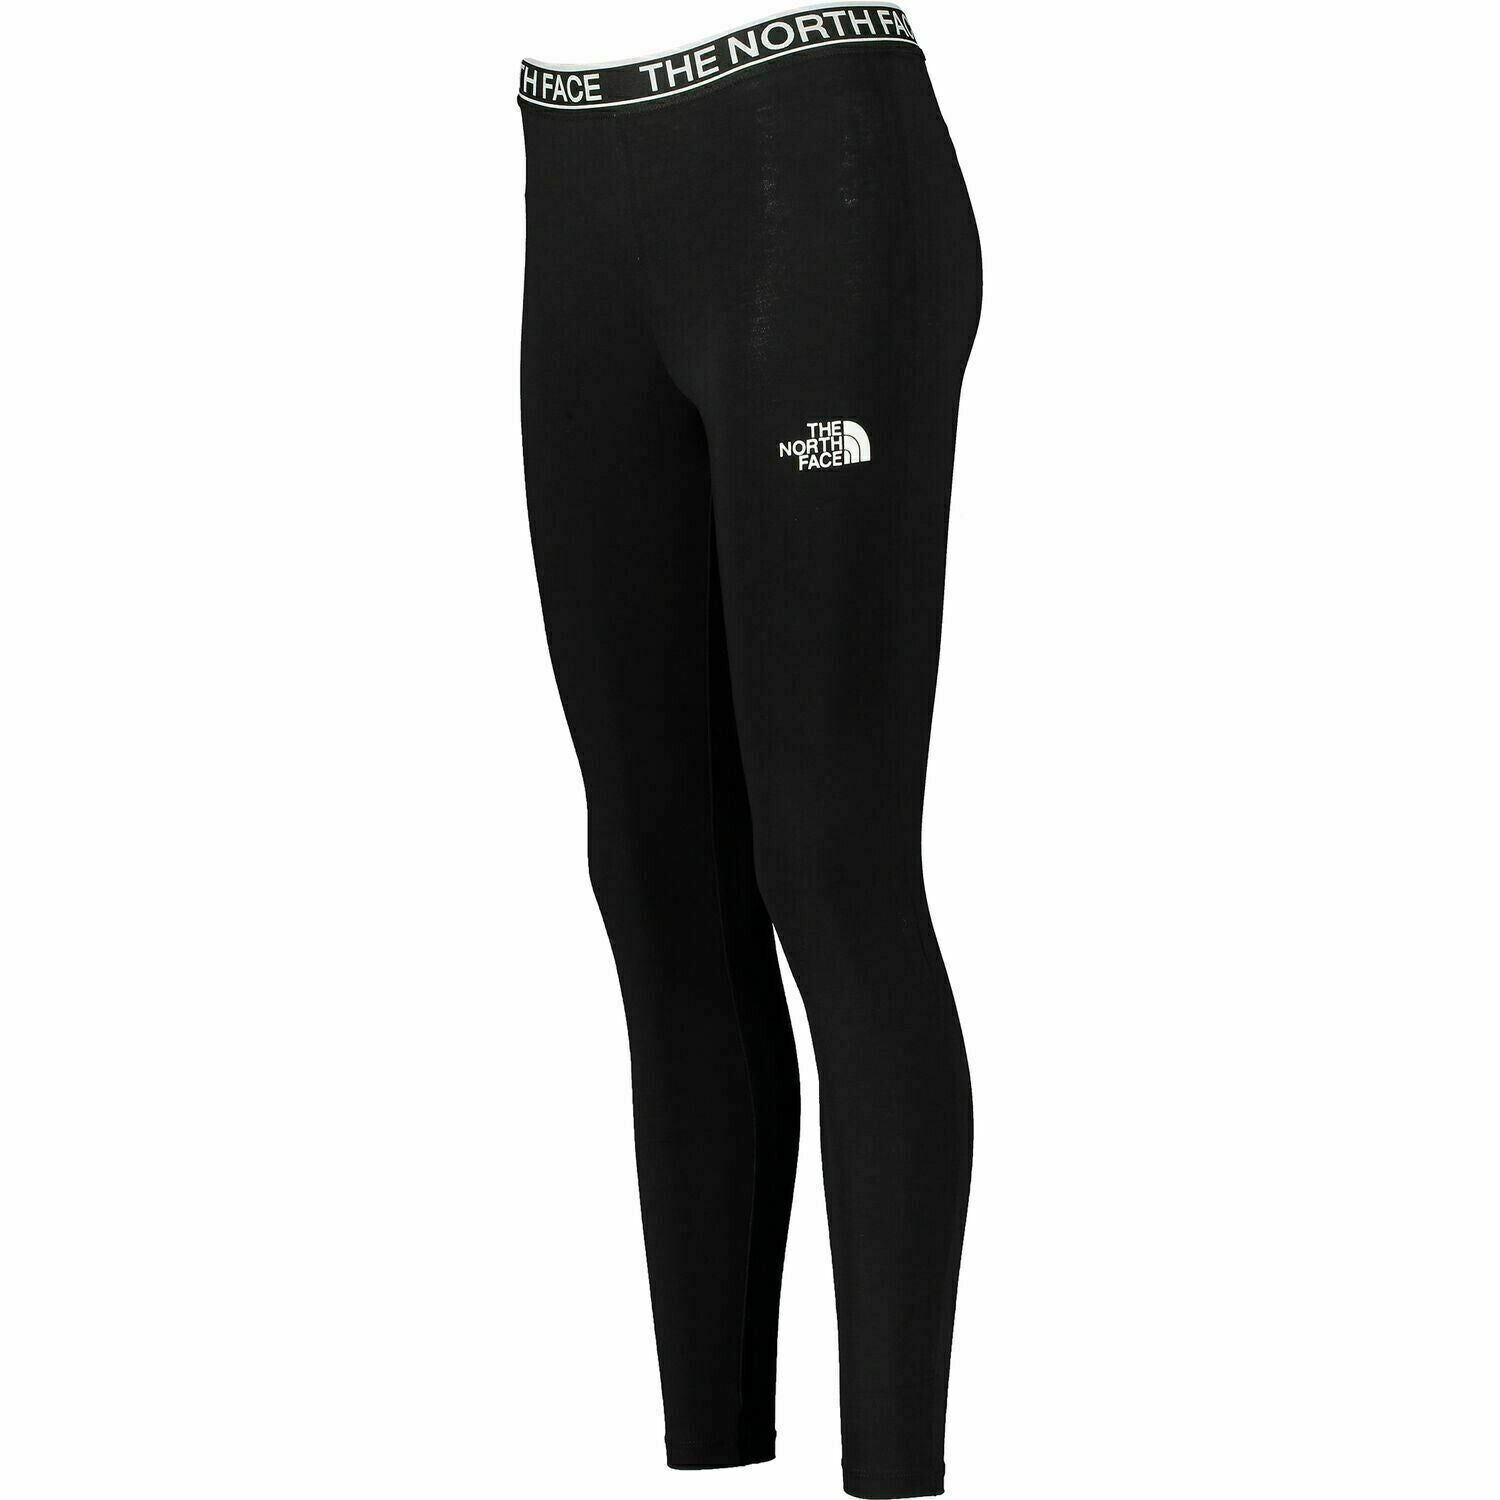 THE NORTH FACE Womens Black Cotton Jersey Leggings, size XS